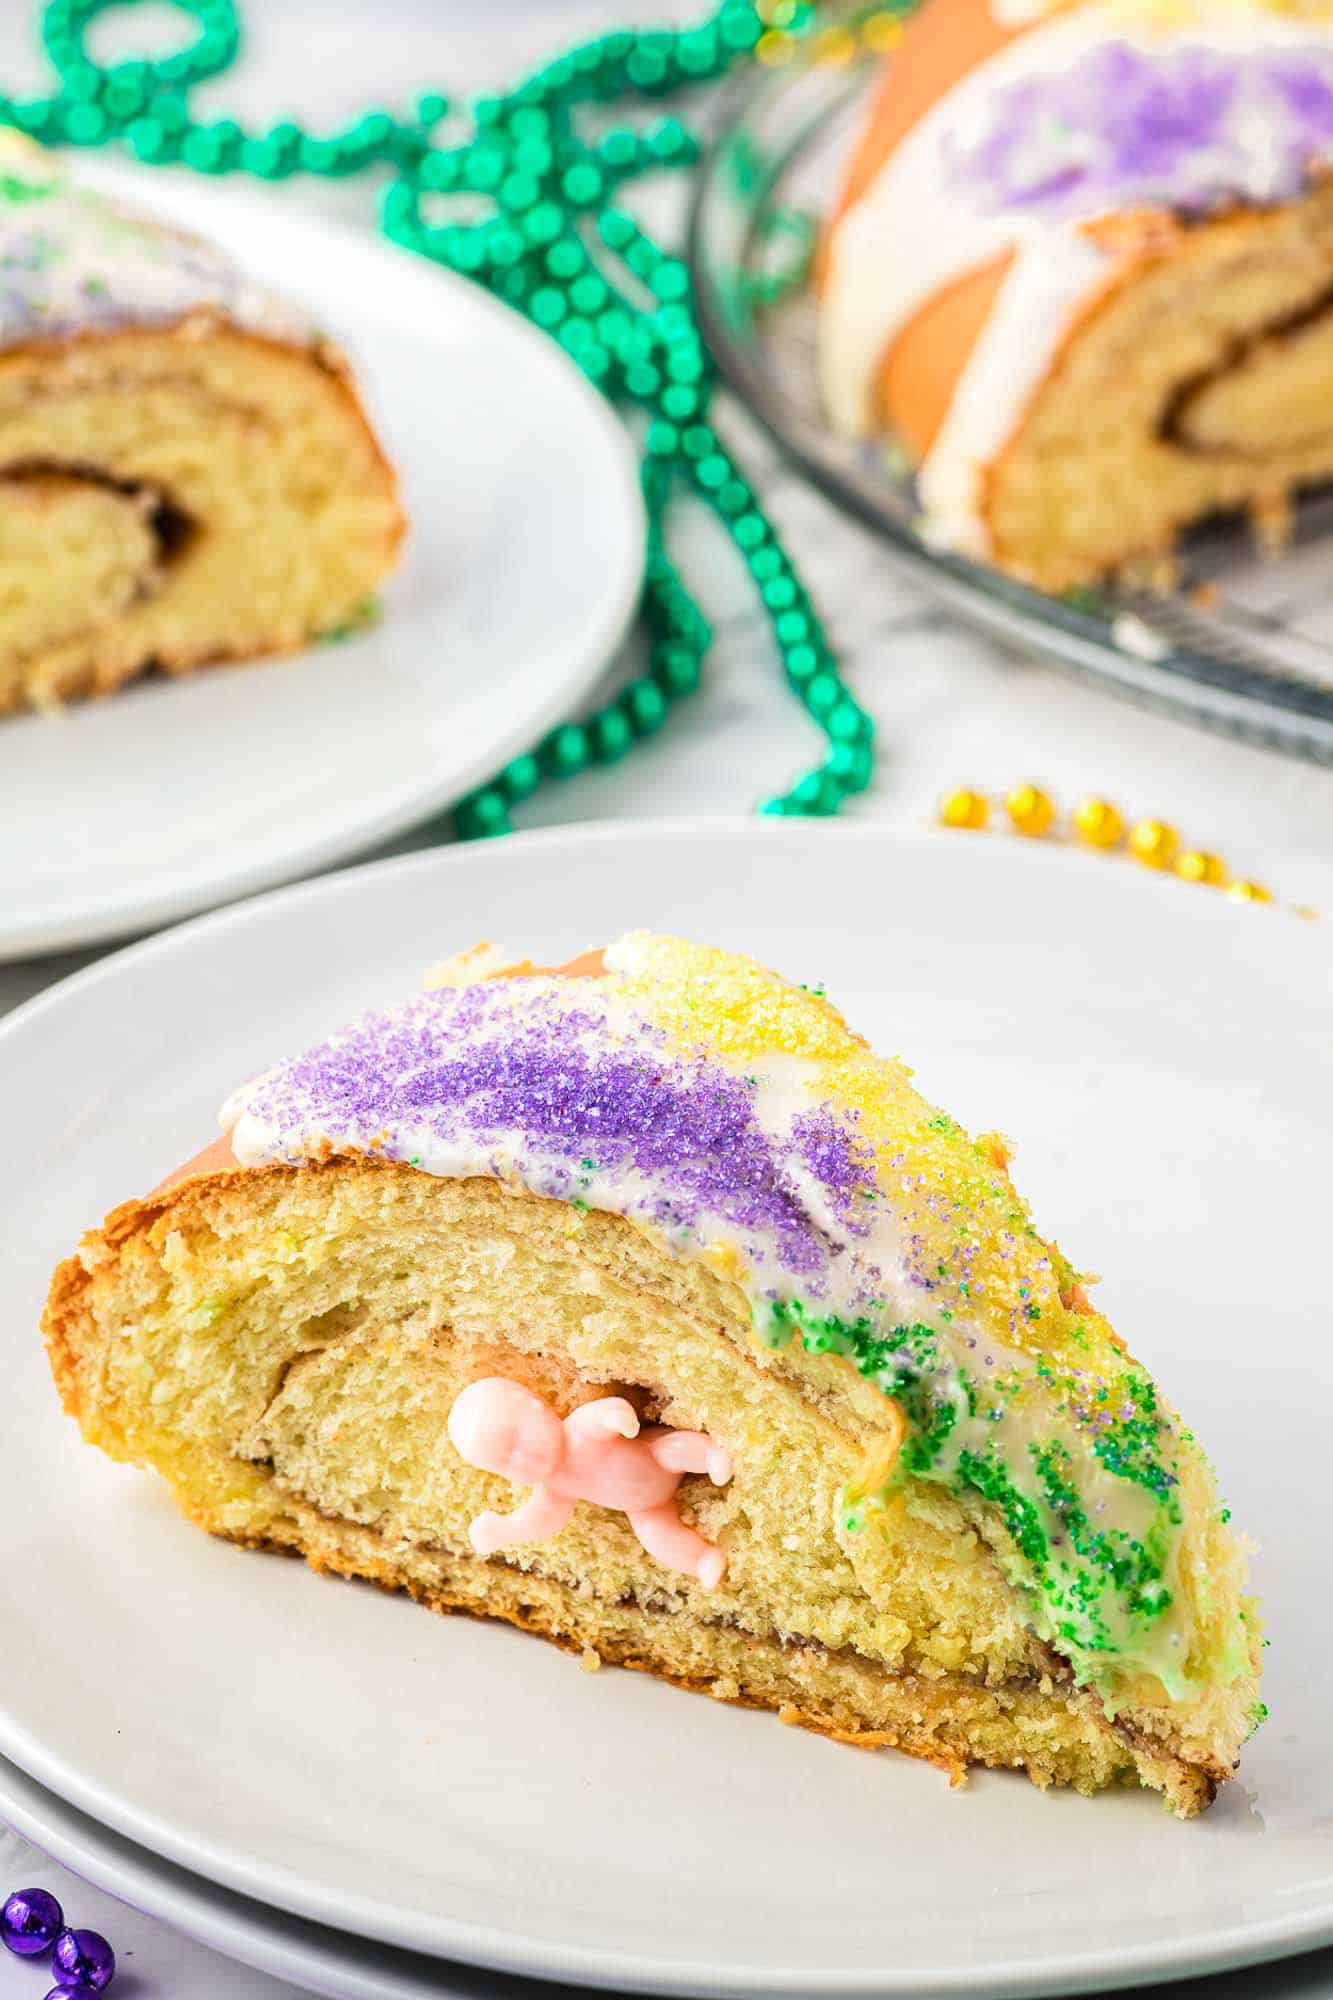 A slice of king cake with a plasic baby inside, served on a white plate.